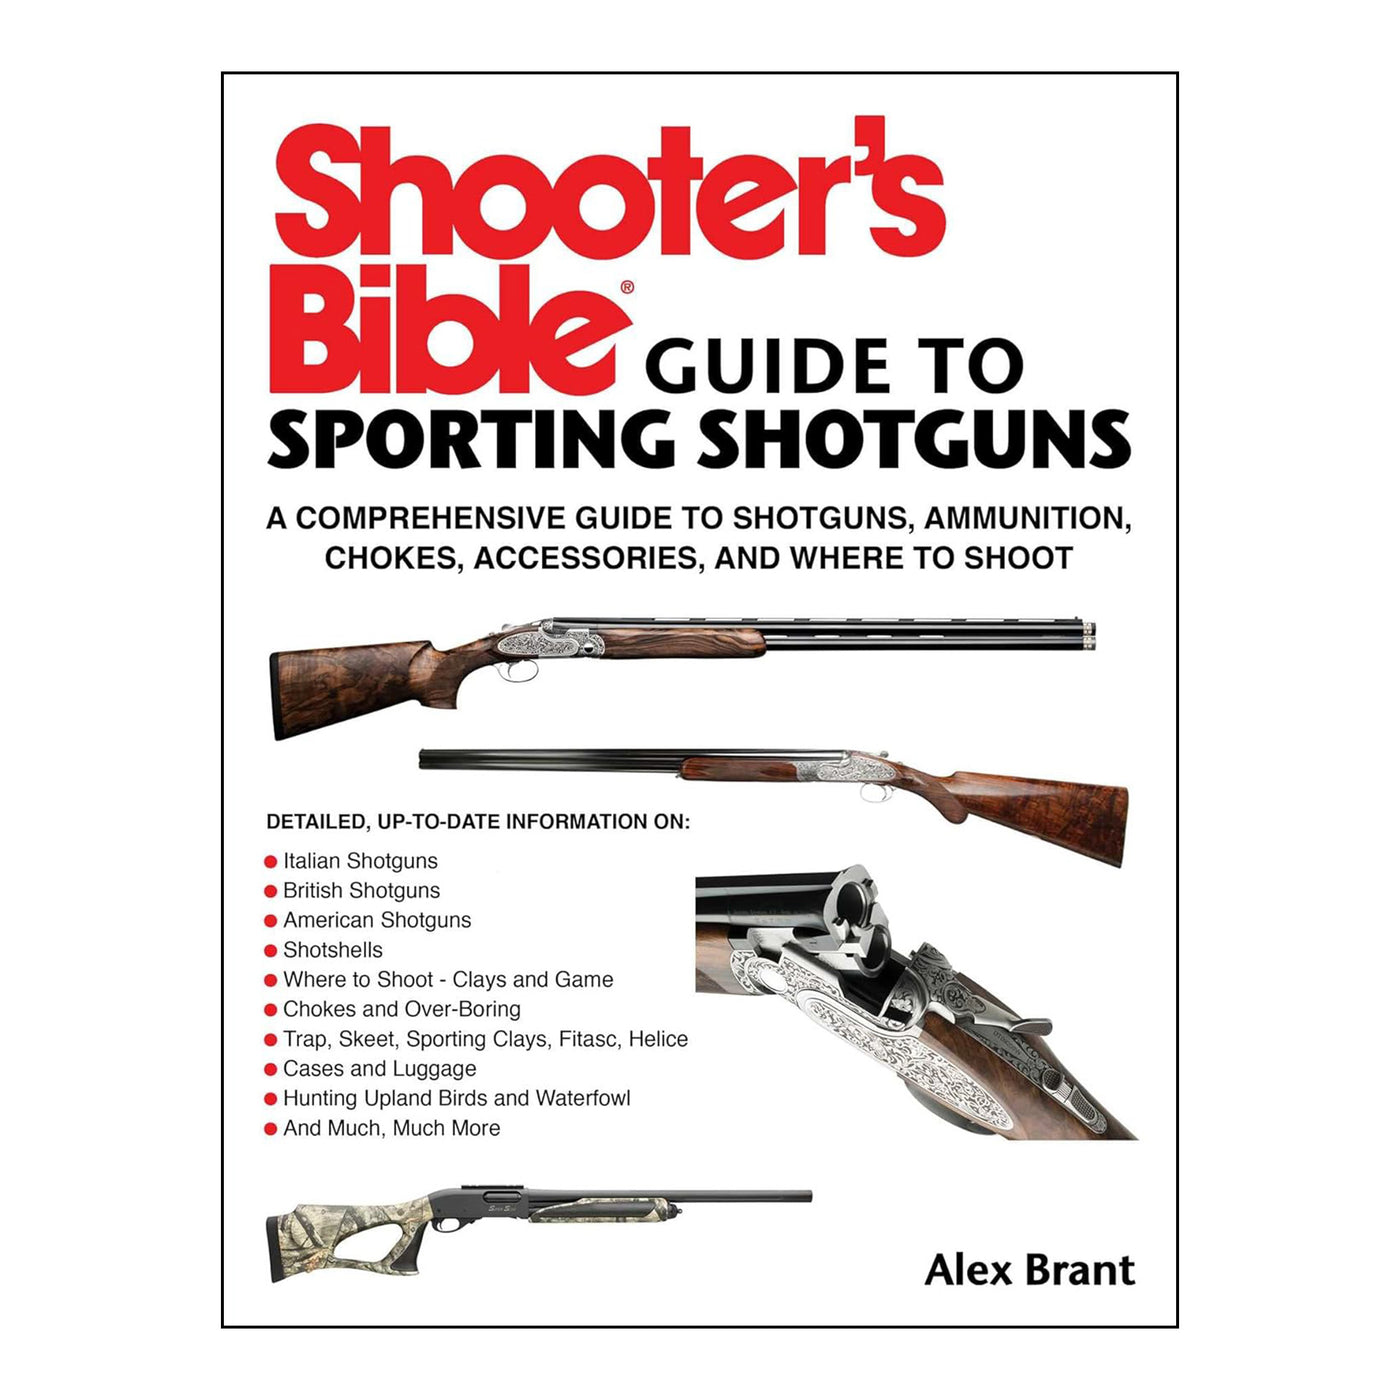 Shooter's Bible Guide to Sporting Shotguns - Alex Brant